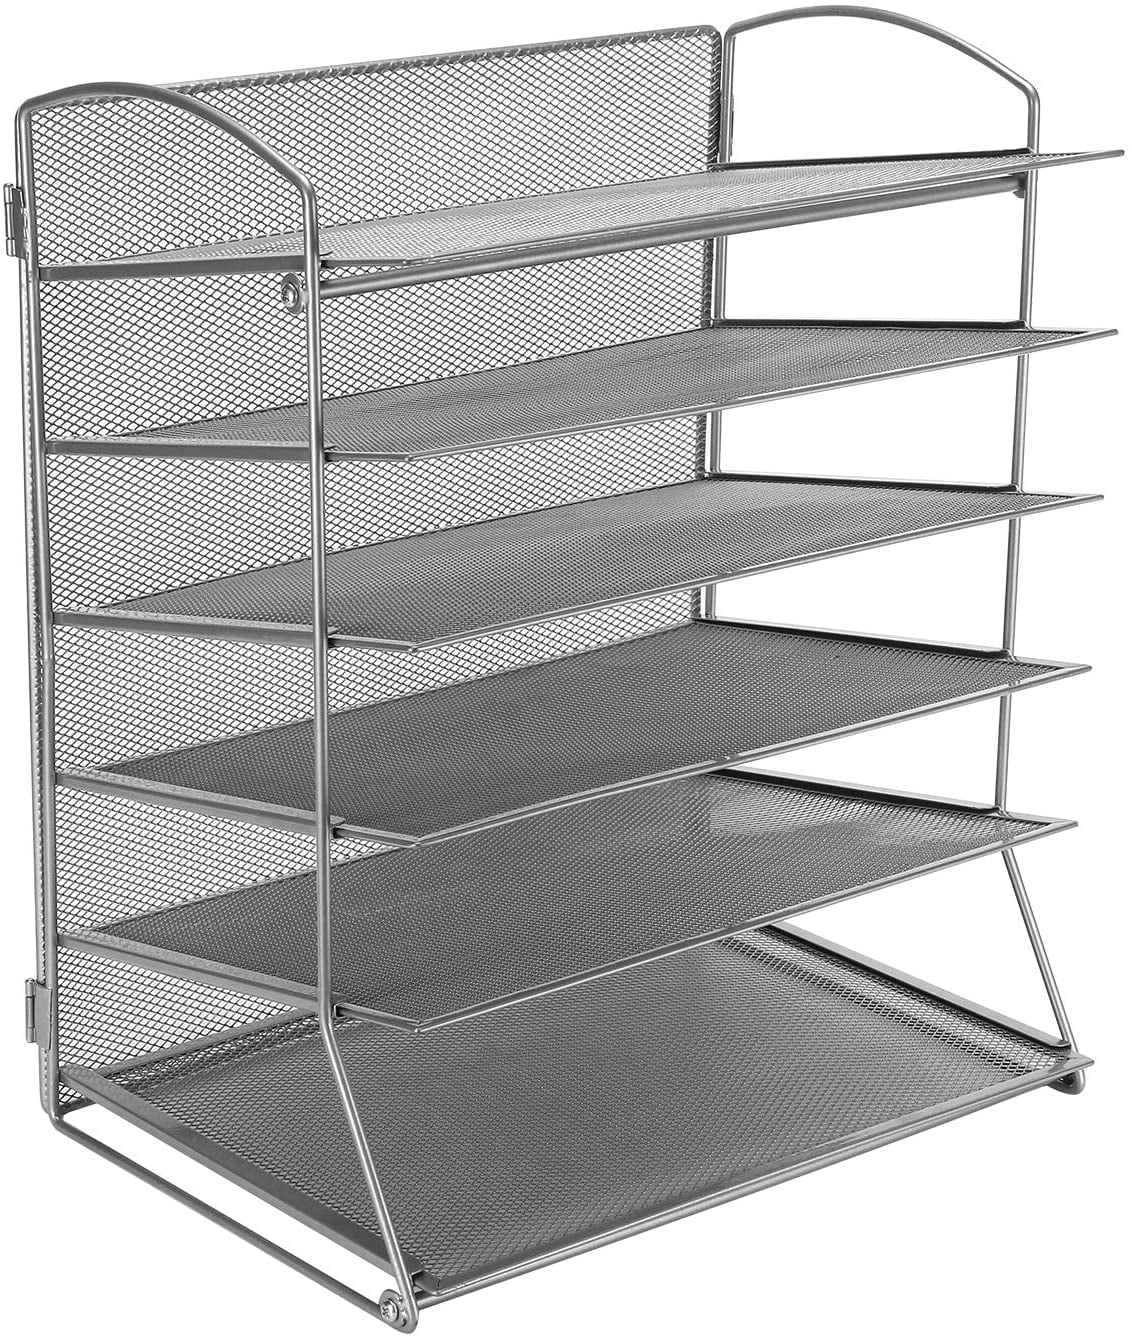 Details about   1 Layer Metal File Trays Desktop Mesh Steel Document Stackable Paper Organizer